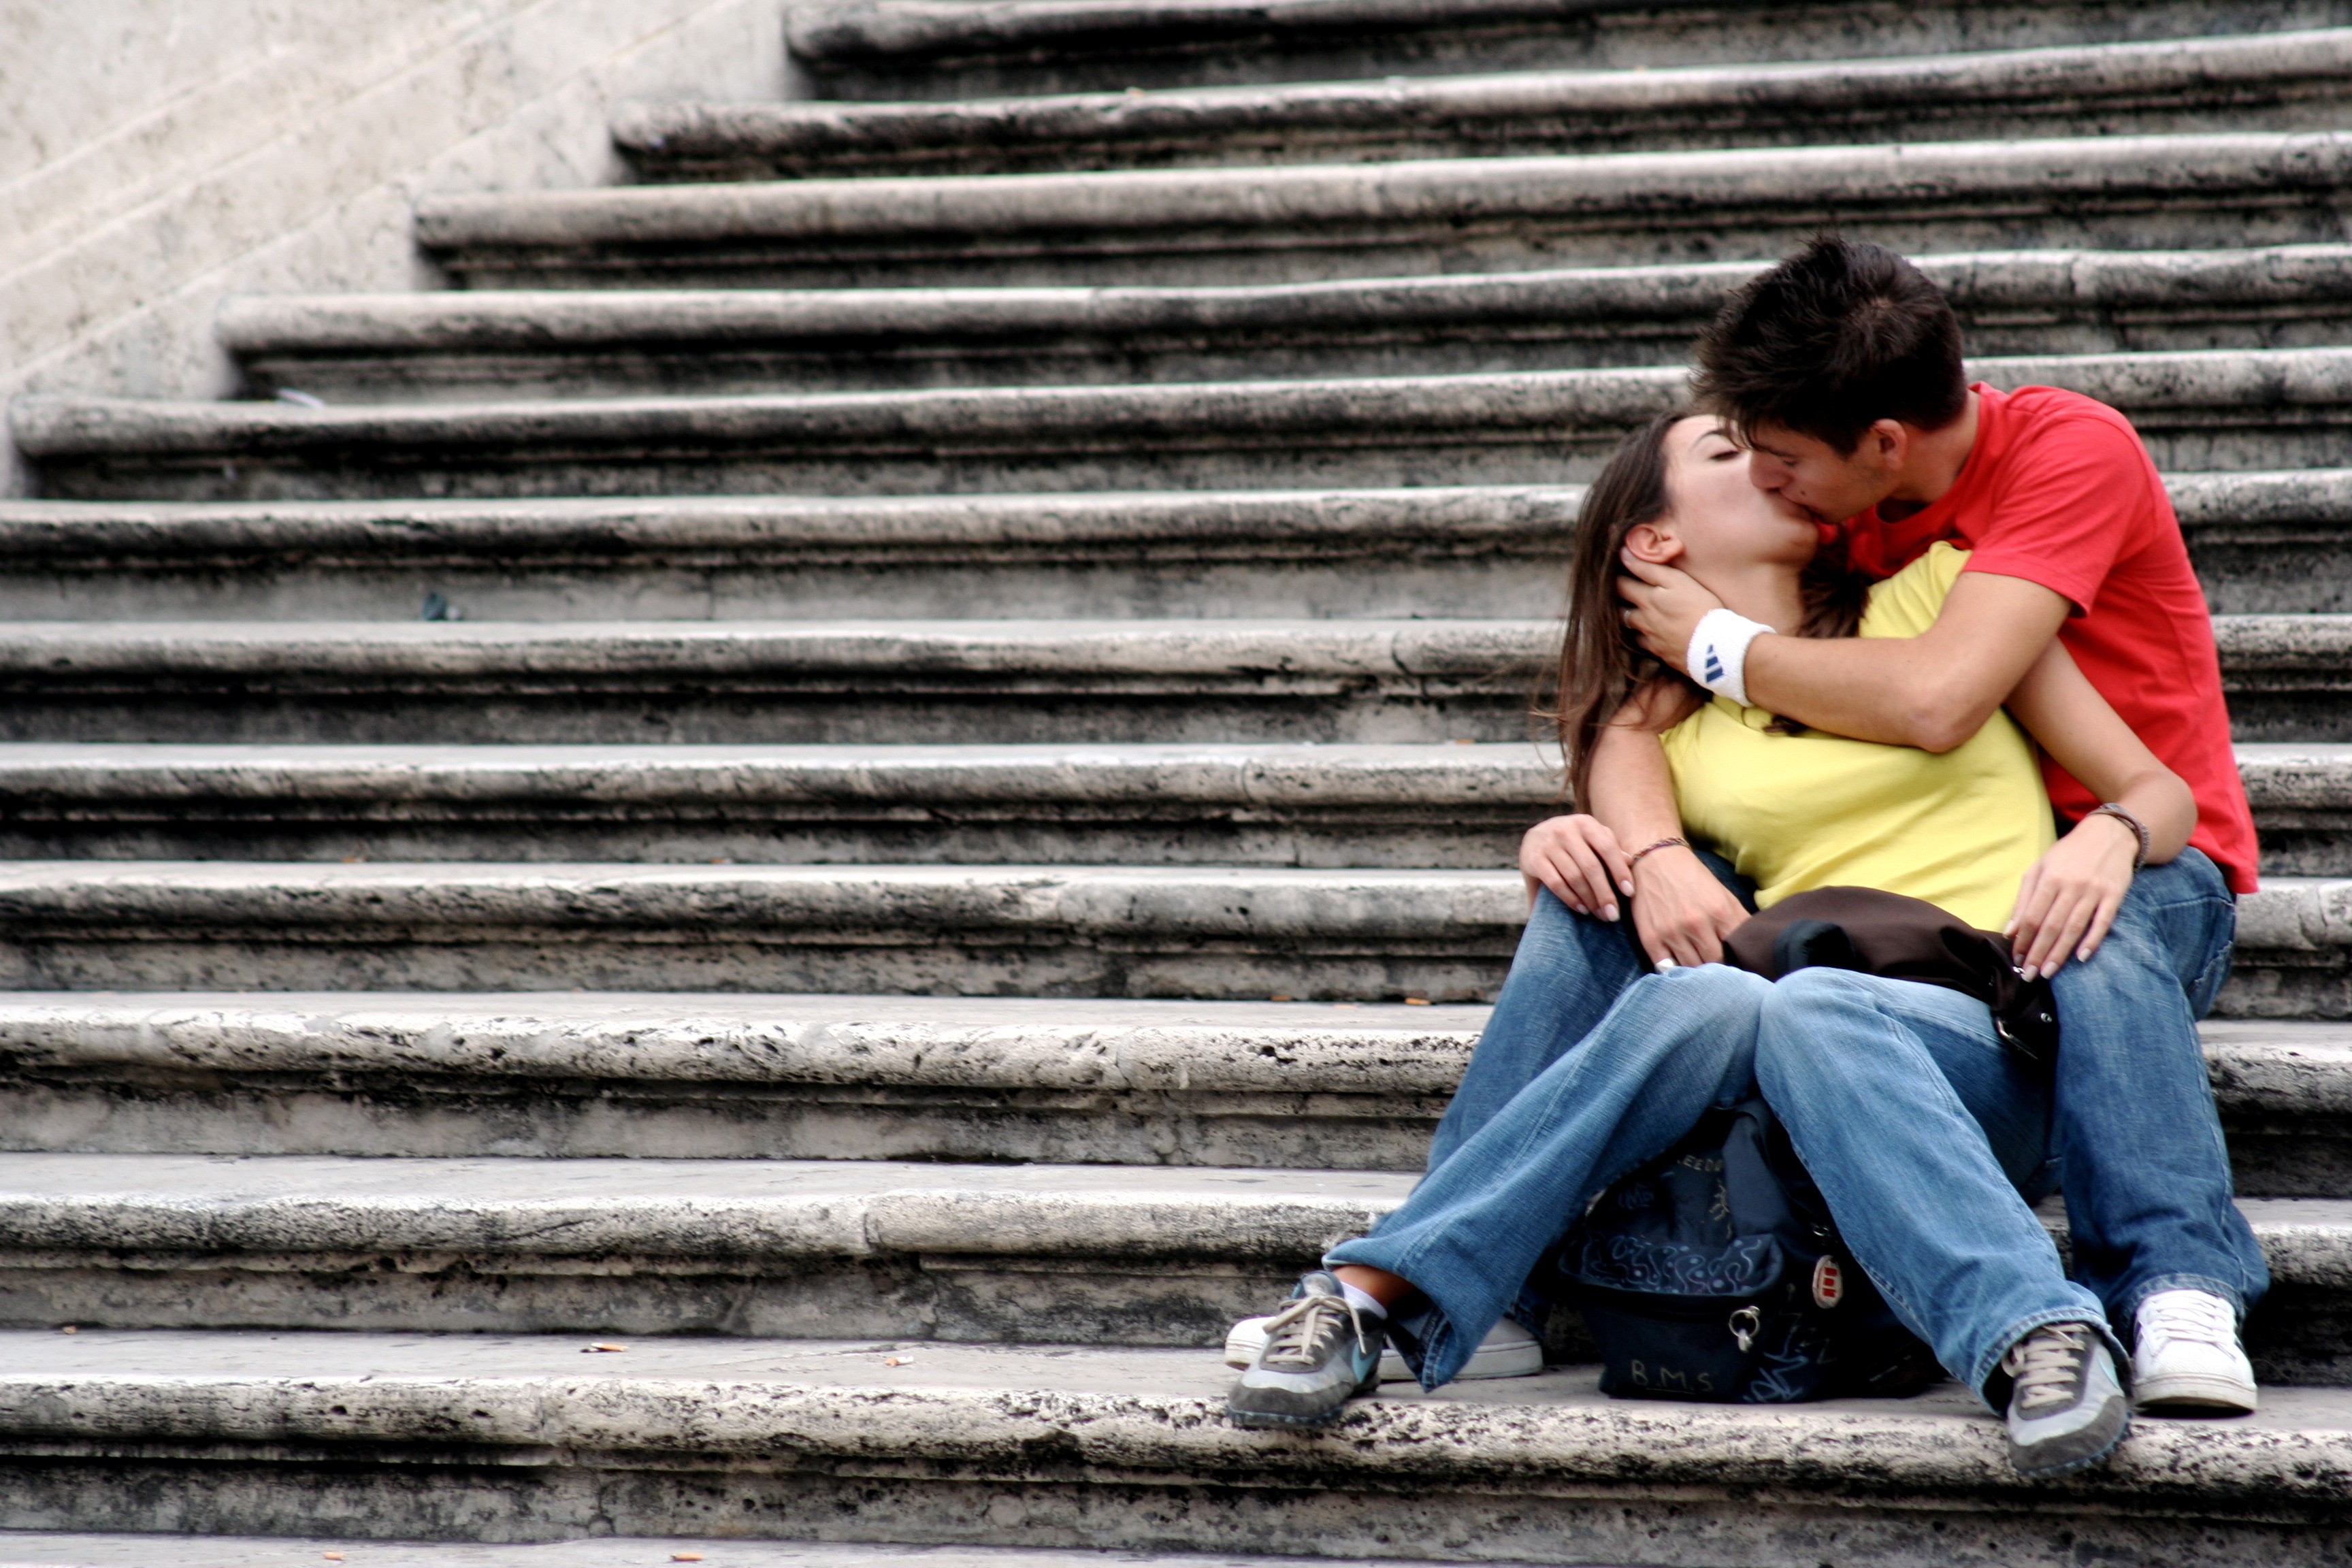 People 3456x2304 couple kissing stairs stone stairs T-shirt women men urban knees together brunette women outdoors